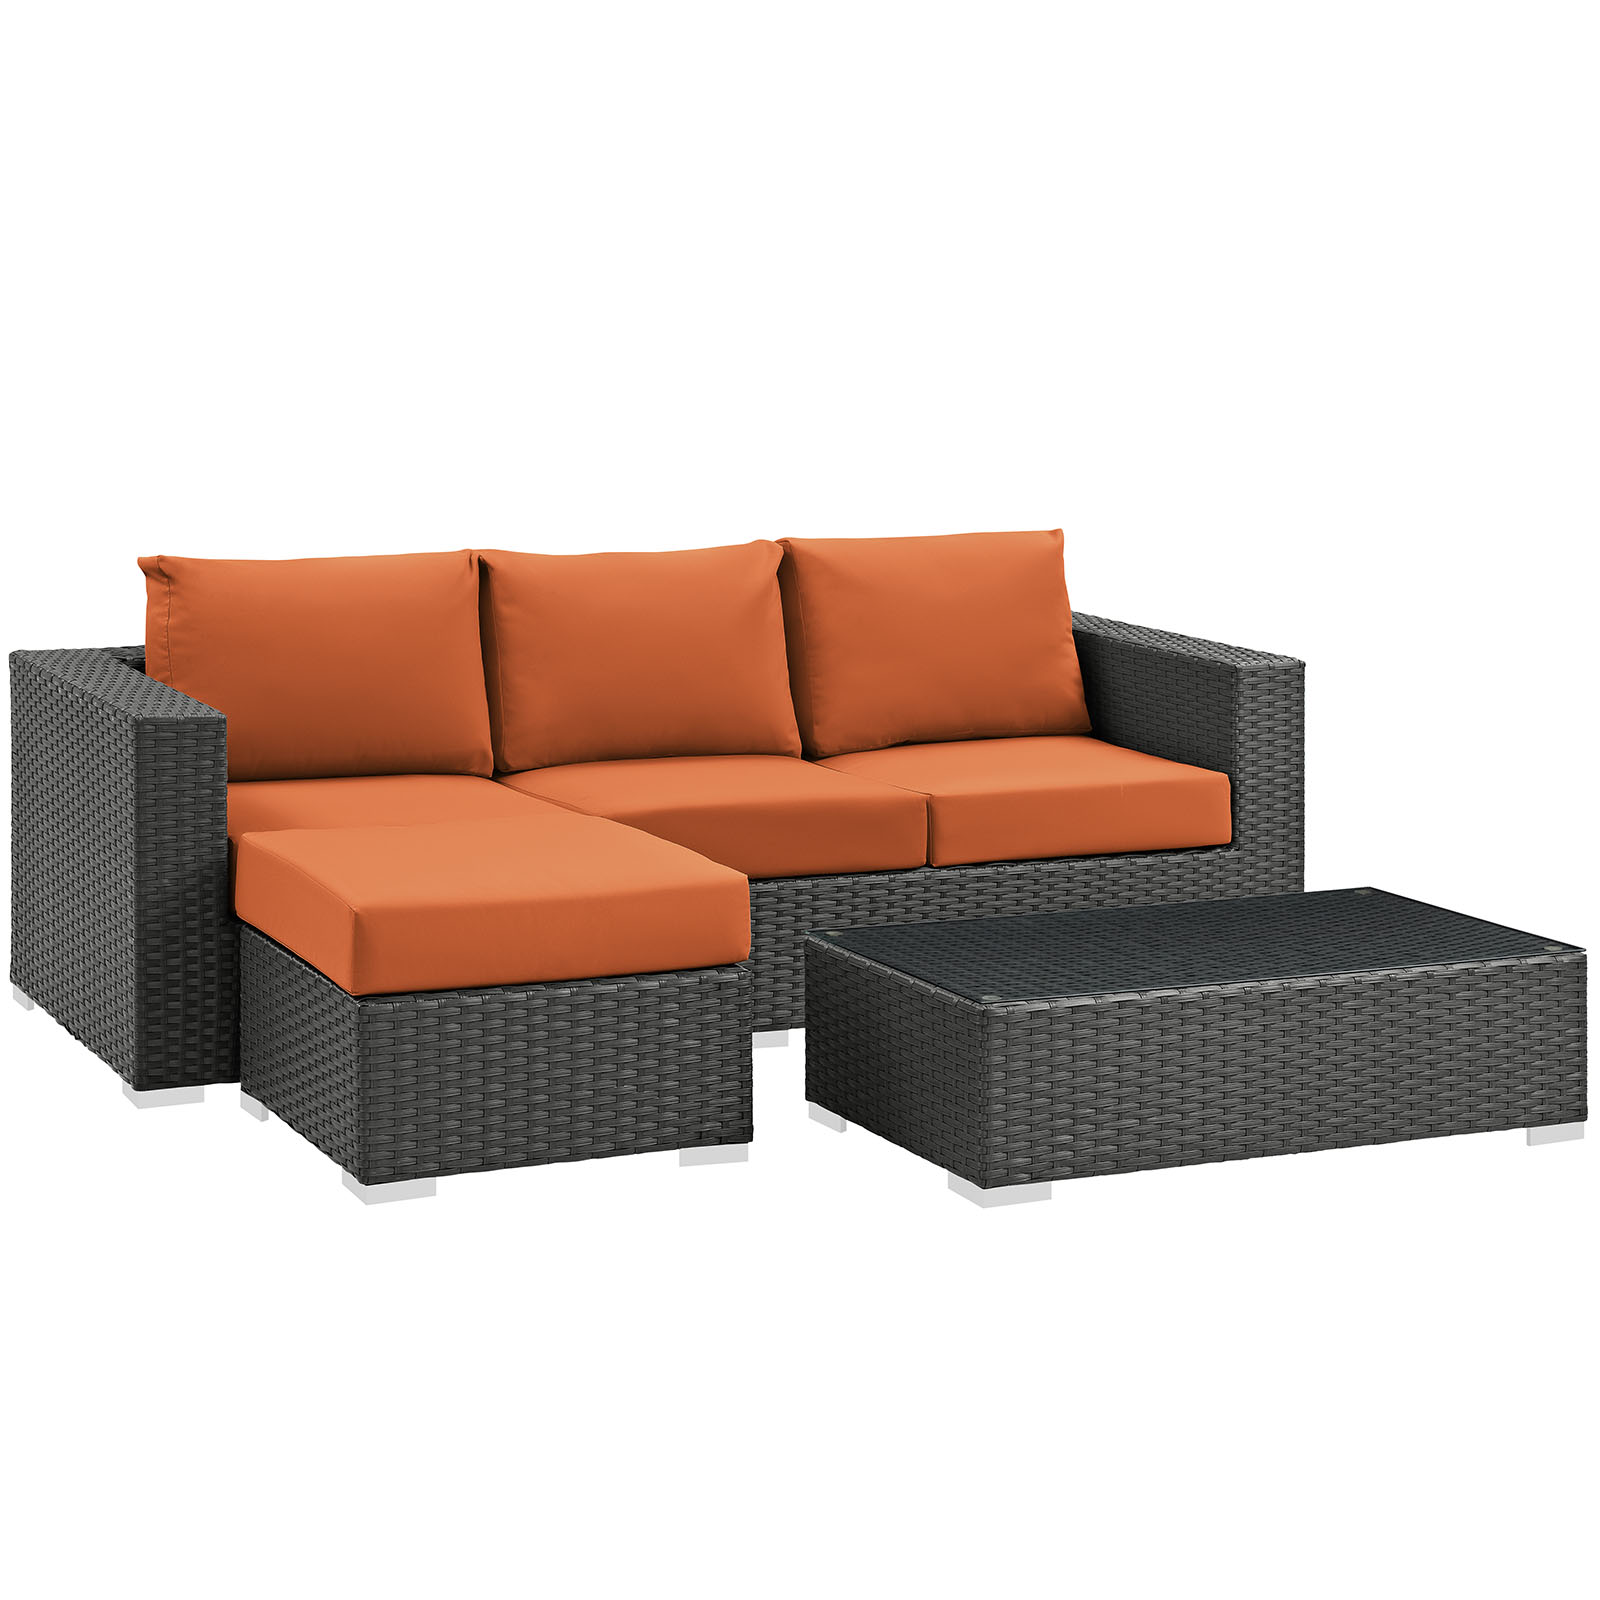 Modway Sojourn 3 Piece Outdoor Patio Sunbrella? Sectional Set in Canvas Tuscan - image 3 of 7